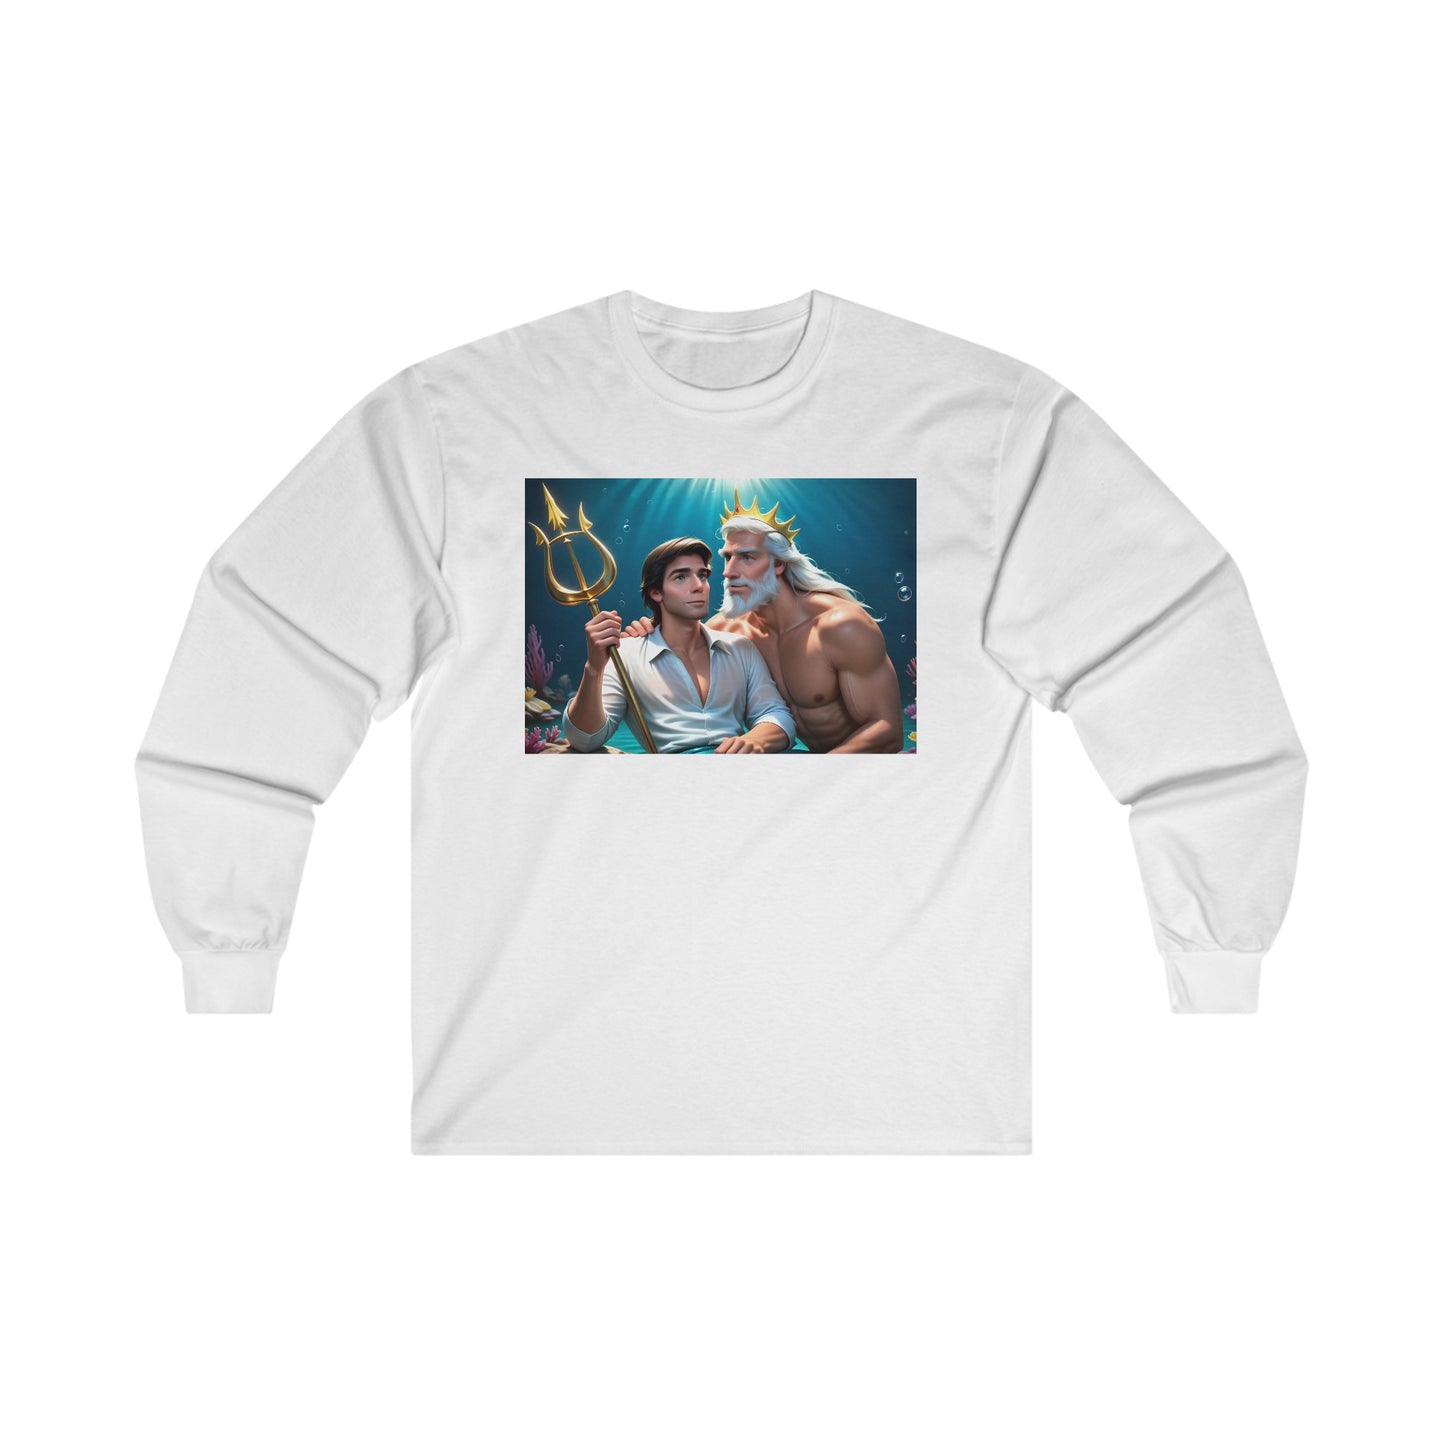 White Gay Prince Eric and Daddy King Triton Long Sleeve T-Shirt